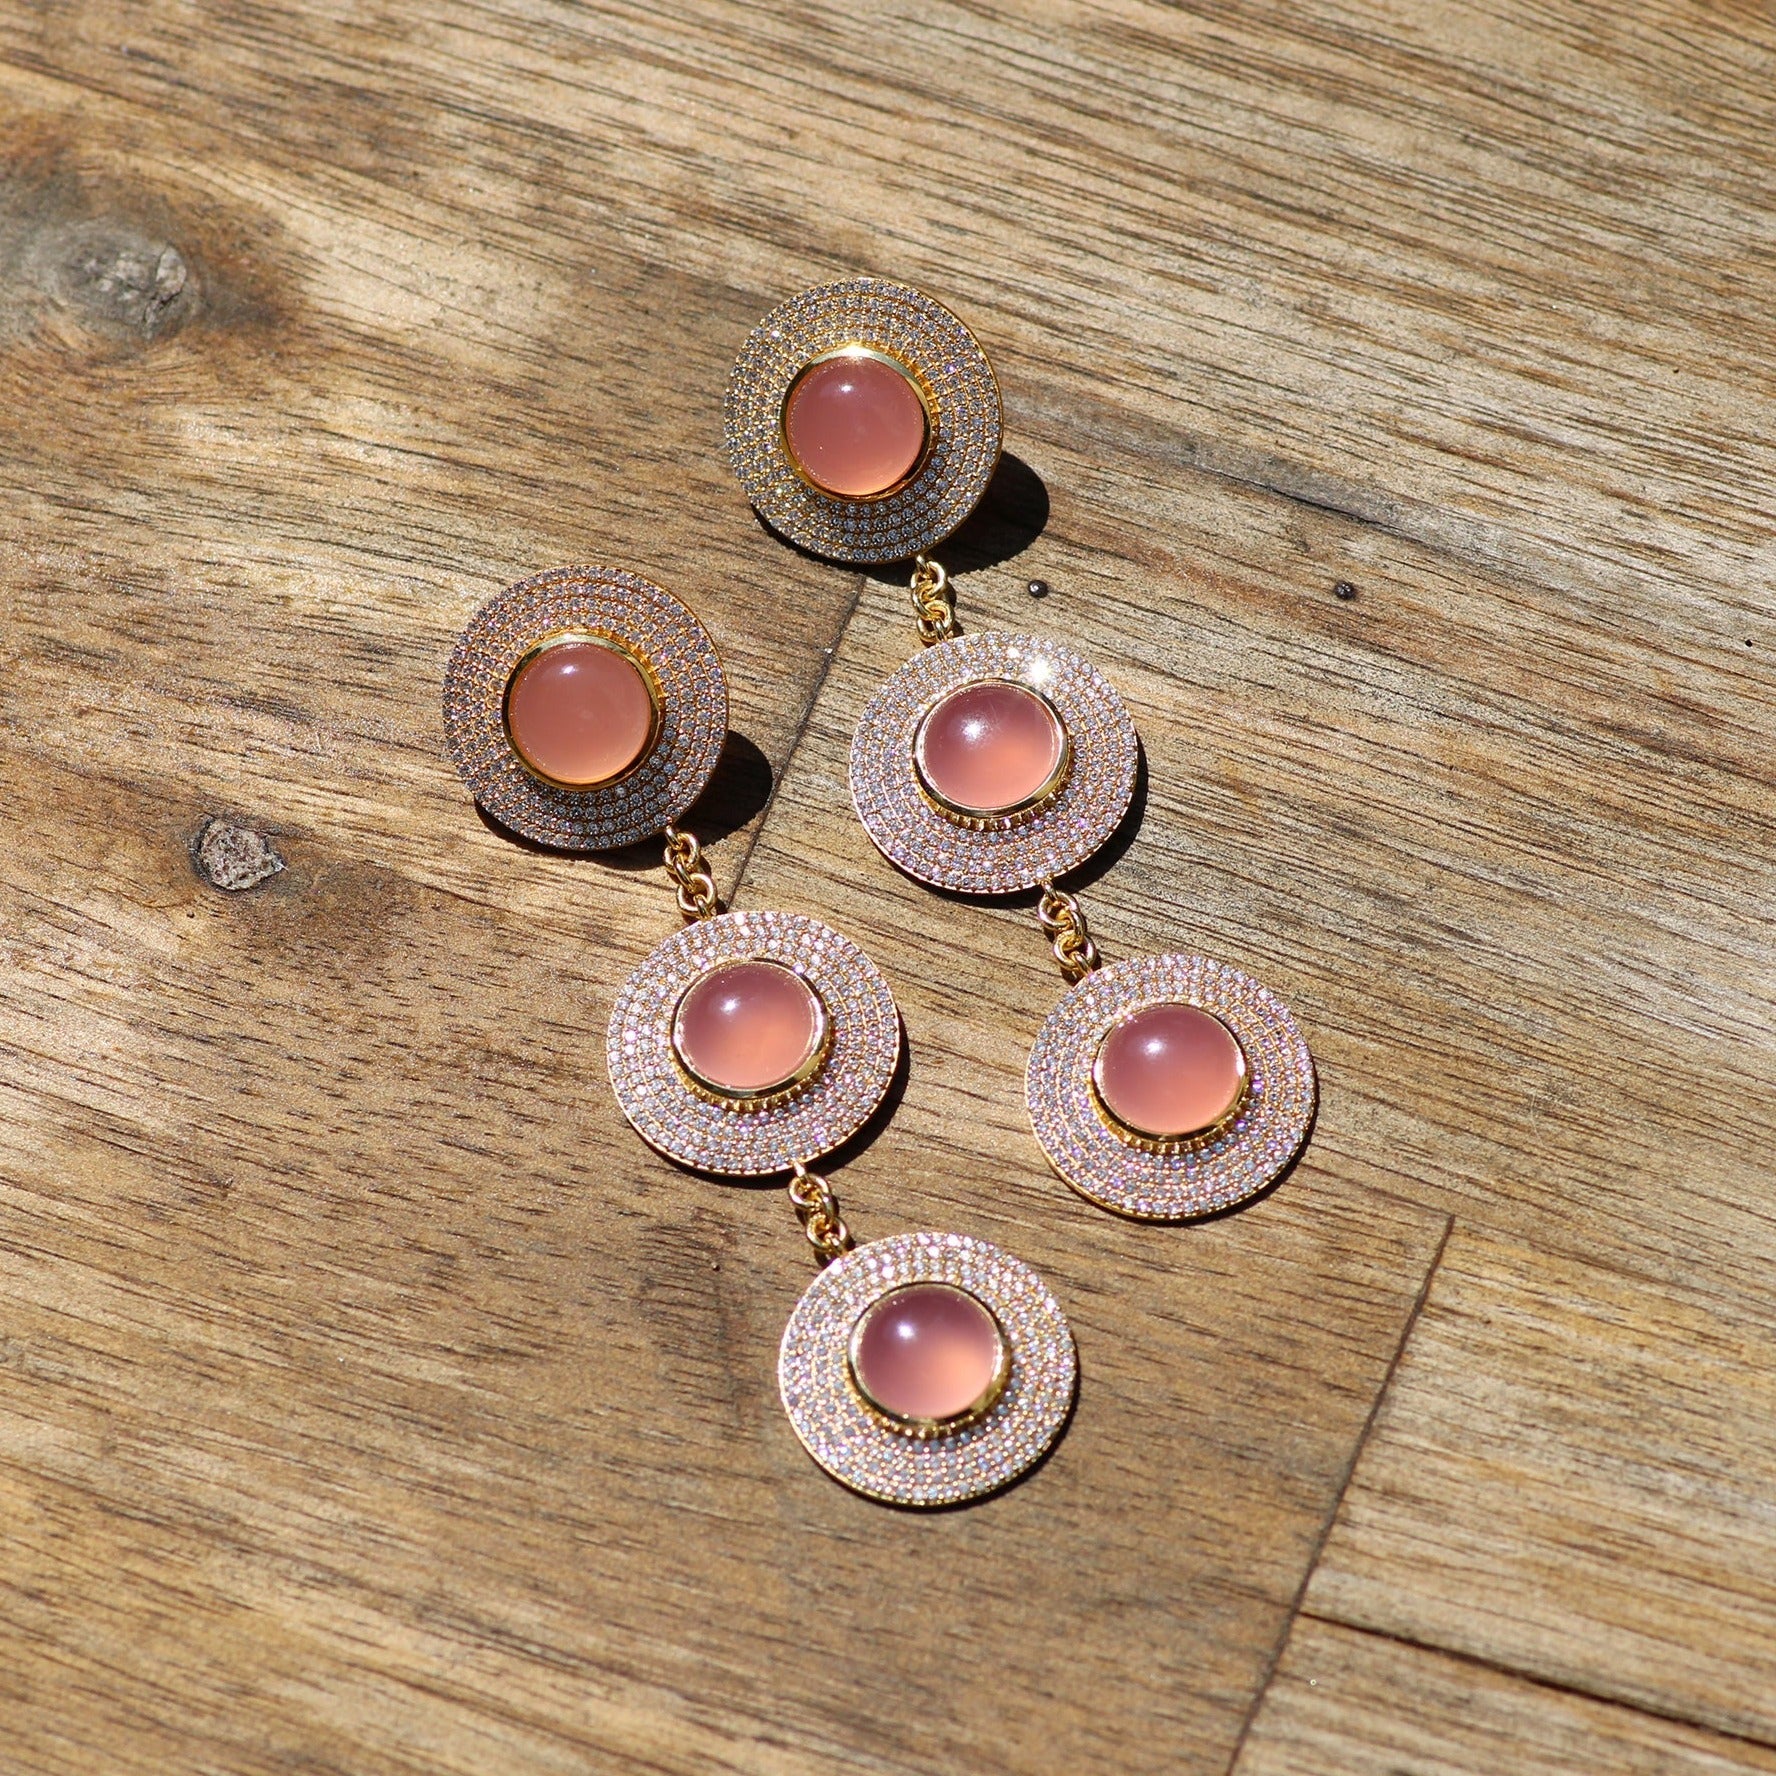 Melissa Sparklers Statement Earrings in Pink Chalcedony